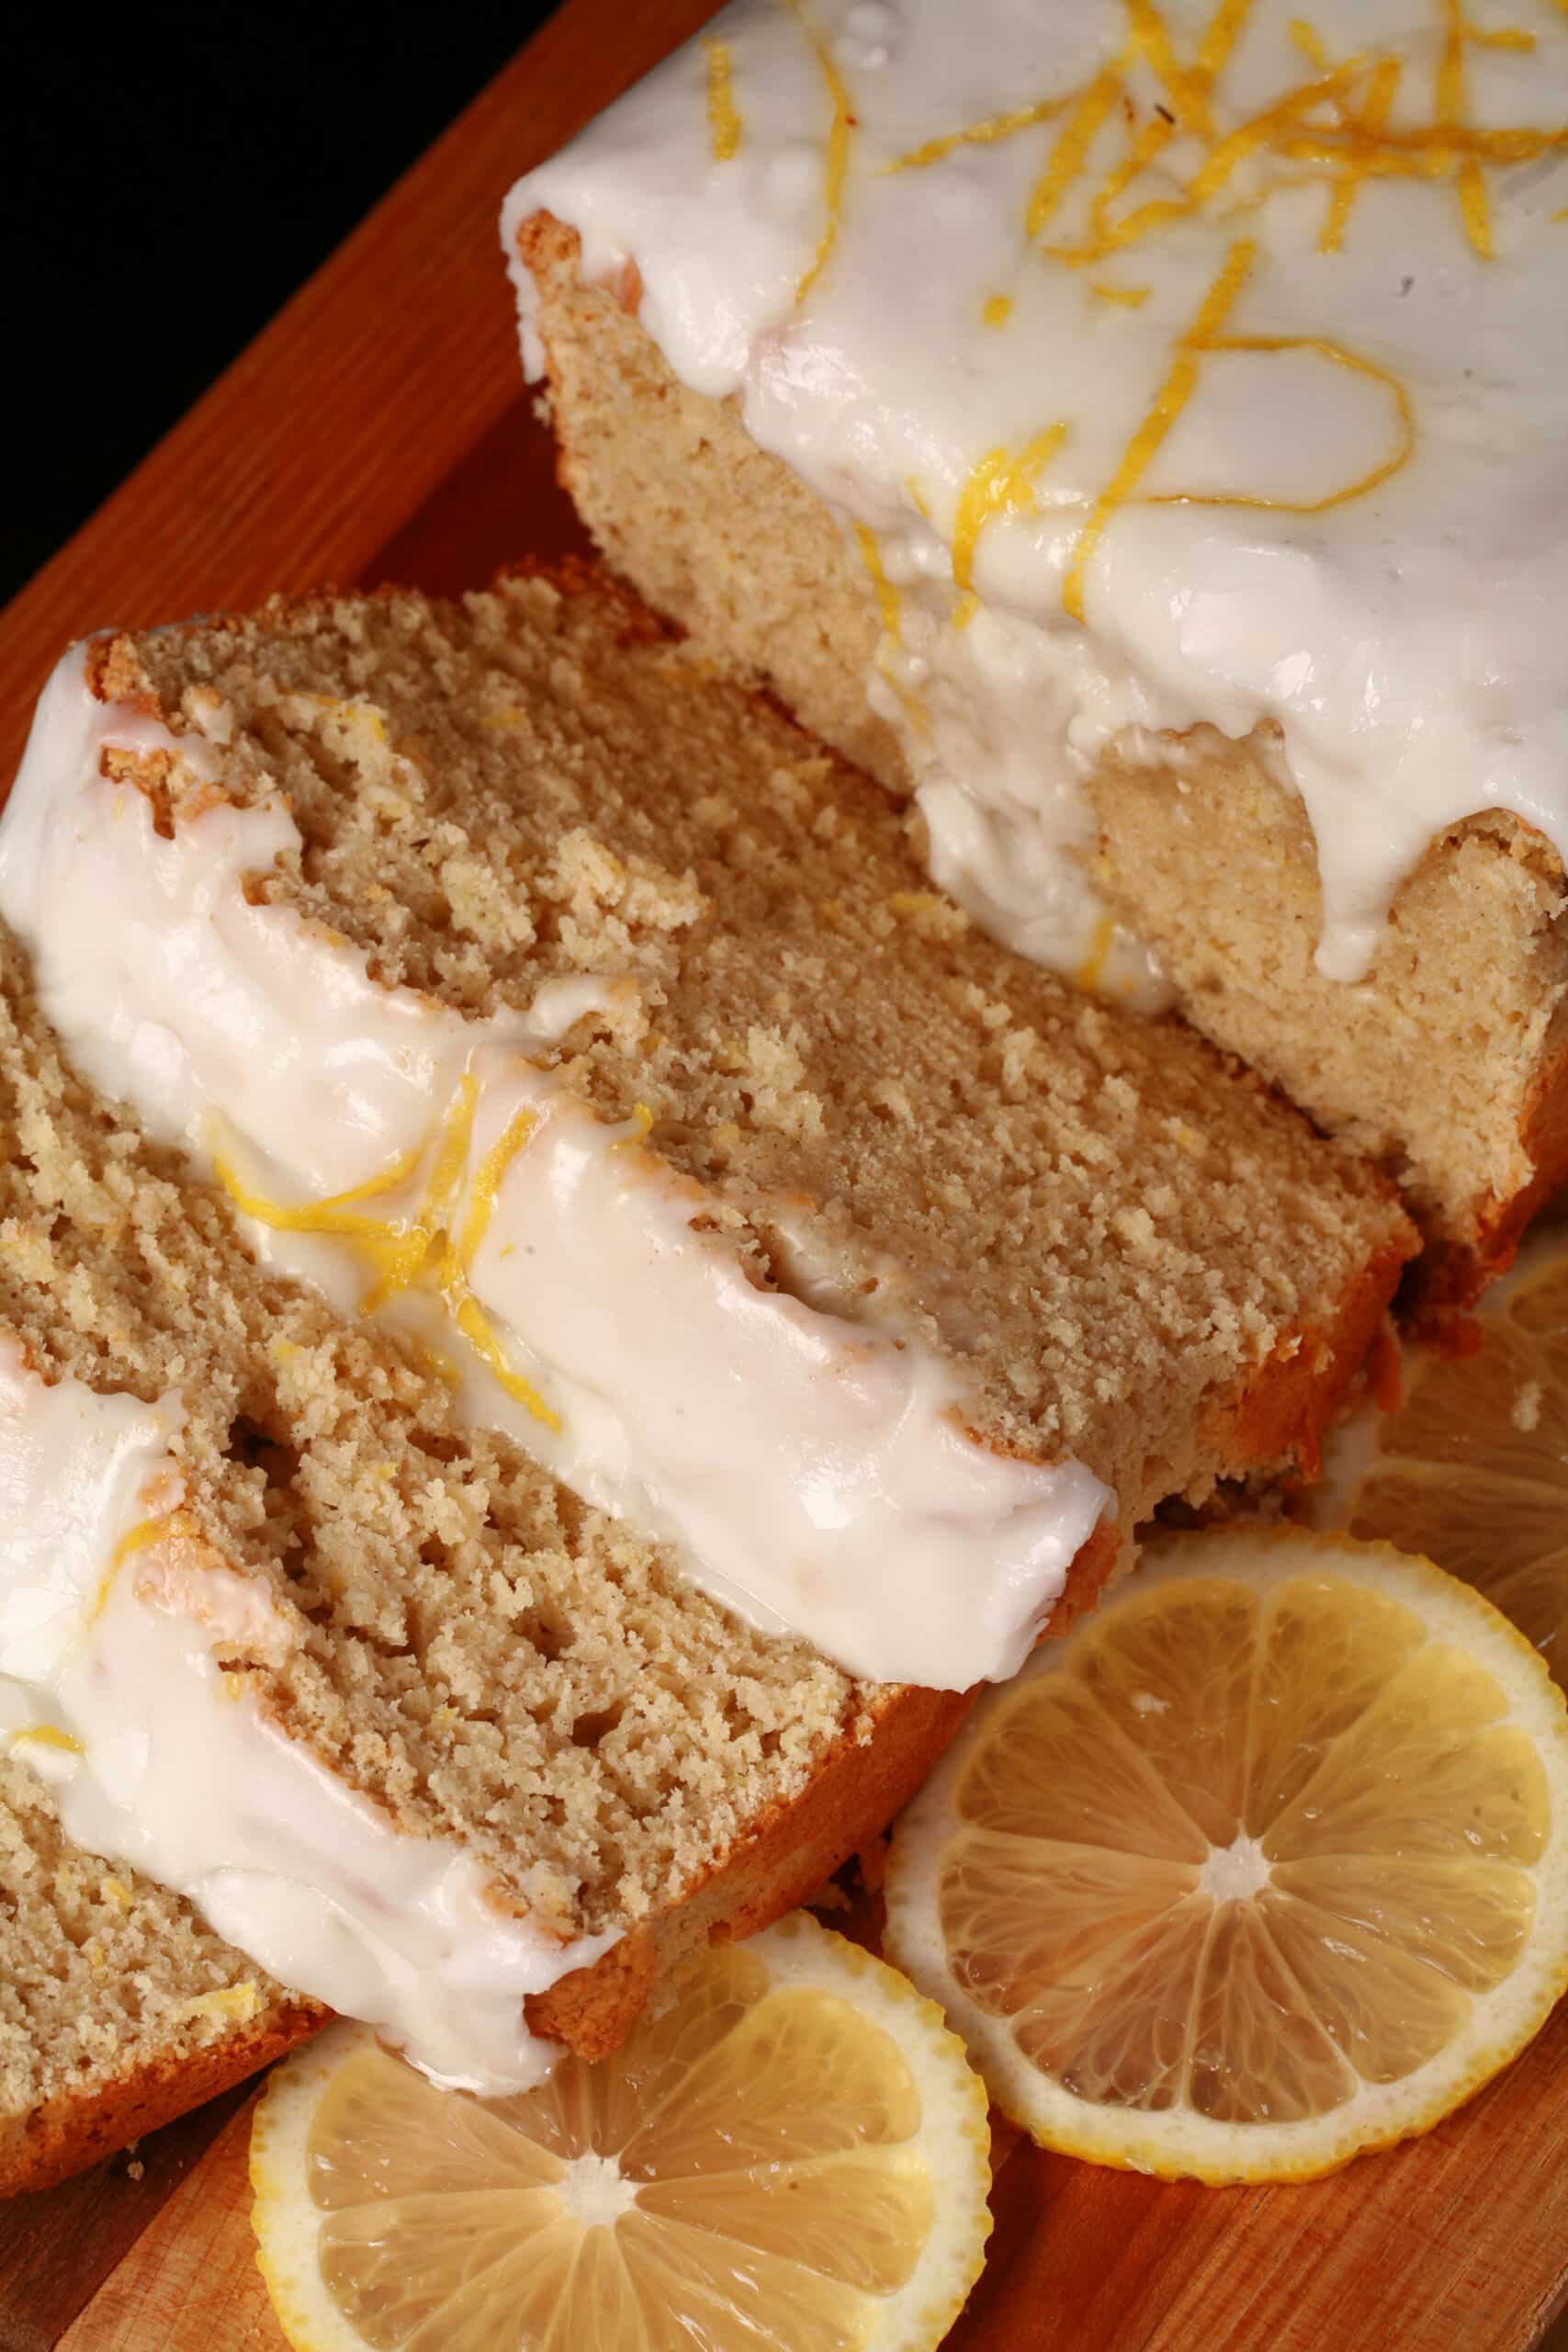 A sliced loaf of gluten-free lemon drizzle cake, with white glaze and lemon zest on top.